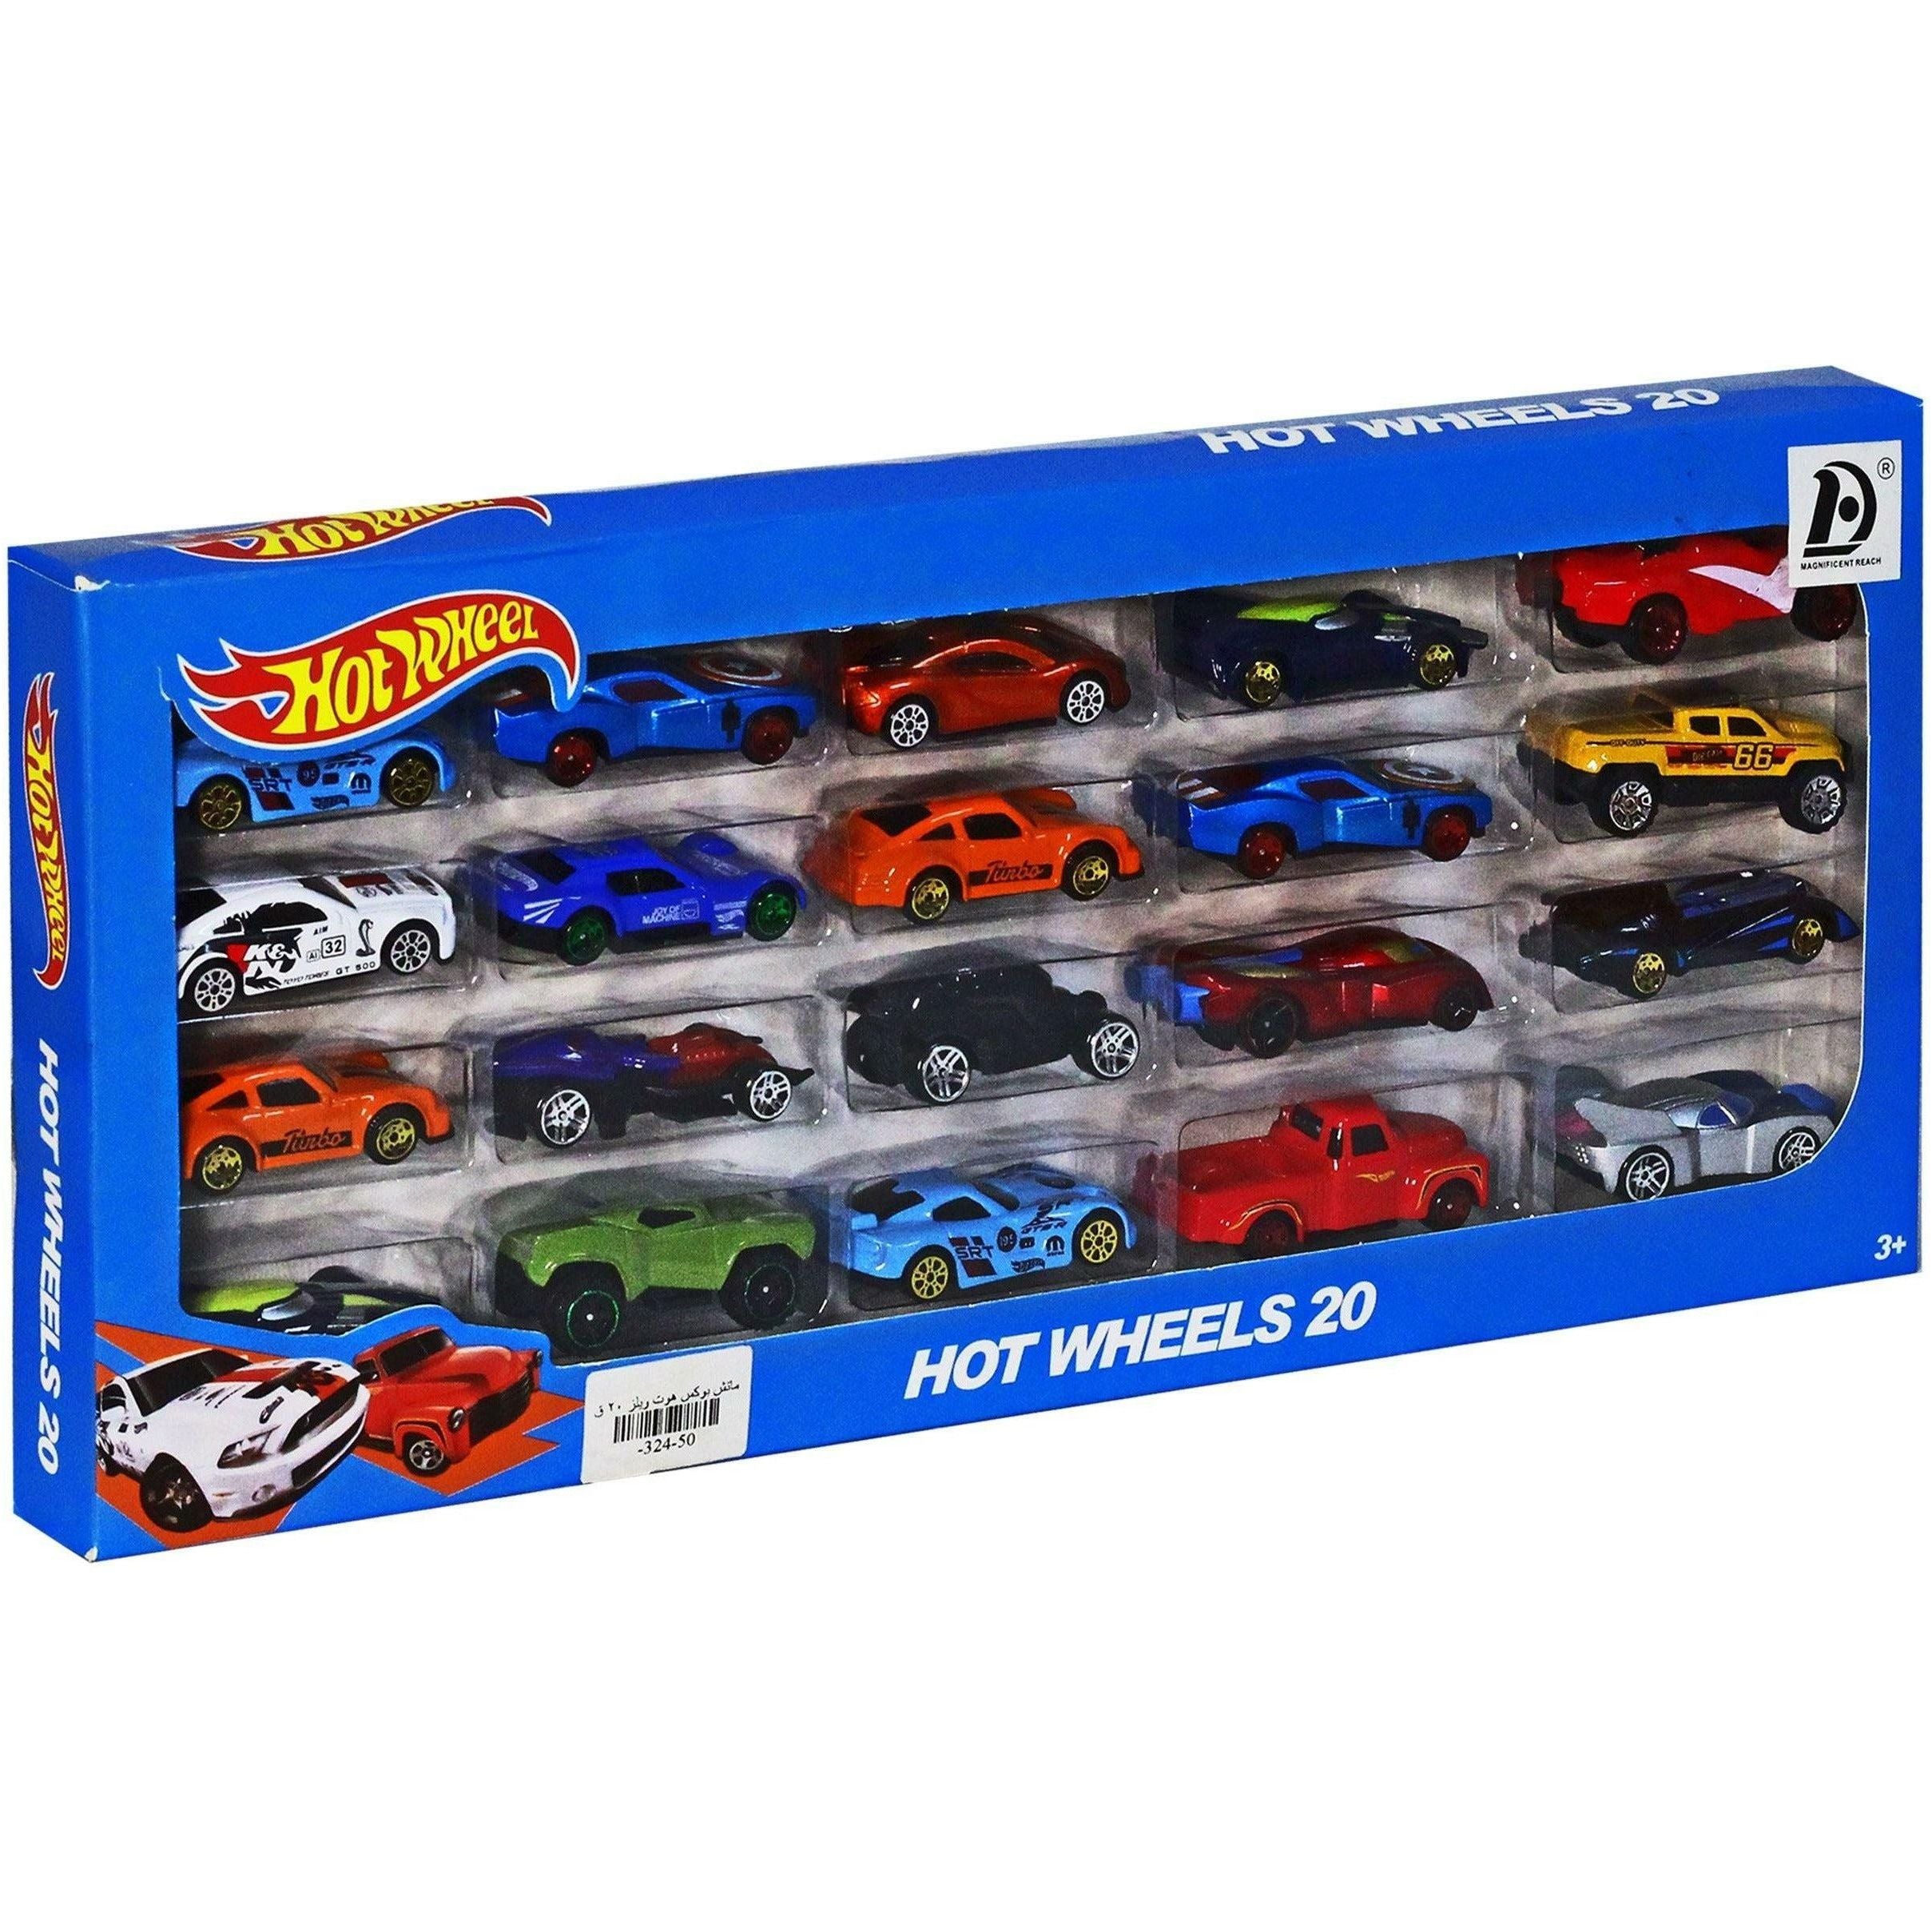 Hot Wheels 20 Cars Pack 1:64 Scale Die Cast Cars hotwheels Set - BumbleToys - 5-7 Years, 8-13 Years, Boys, Collectible Vehicles, Toy Land